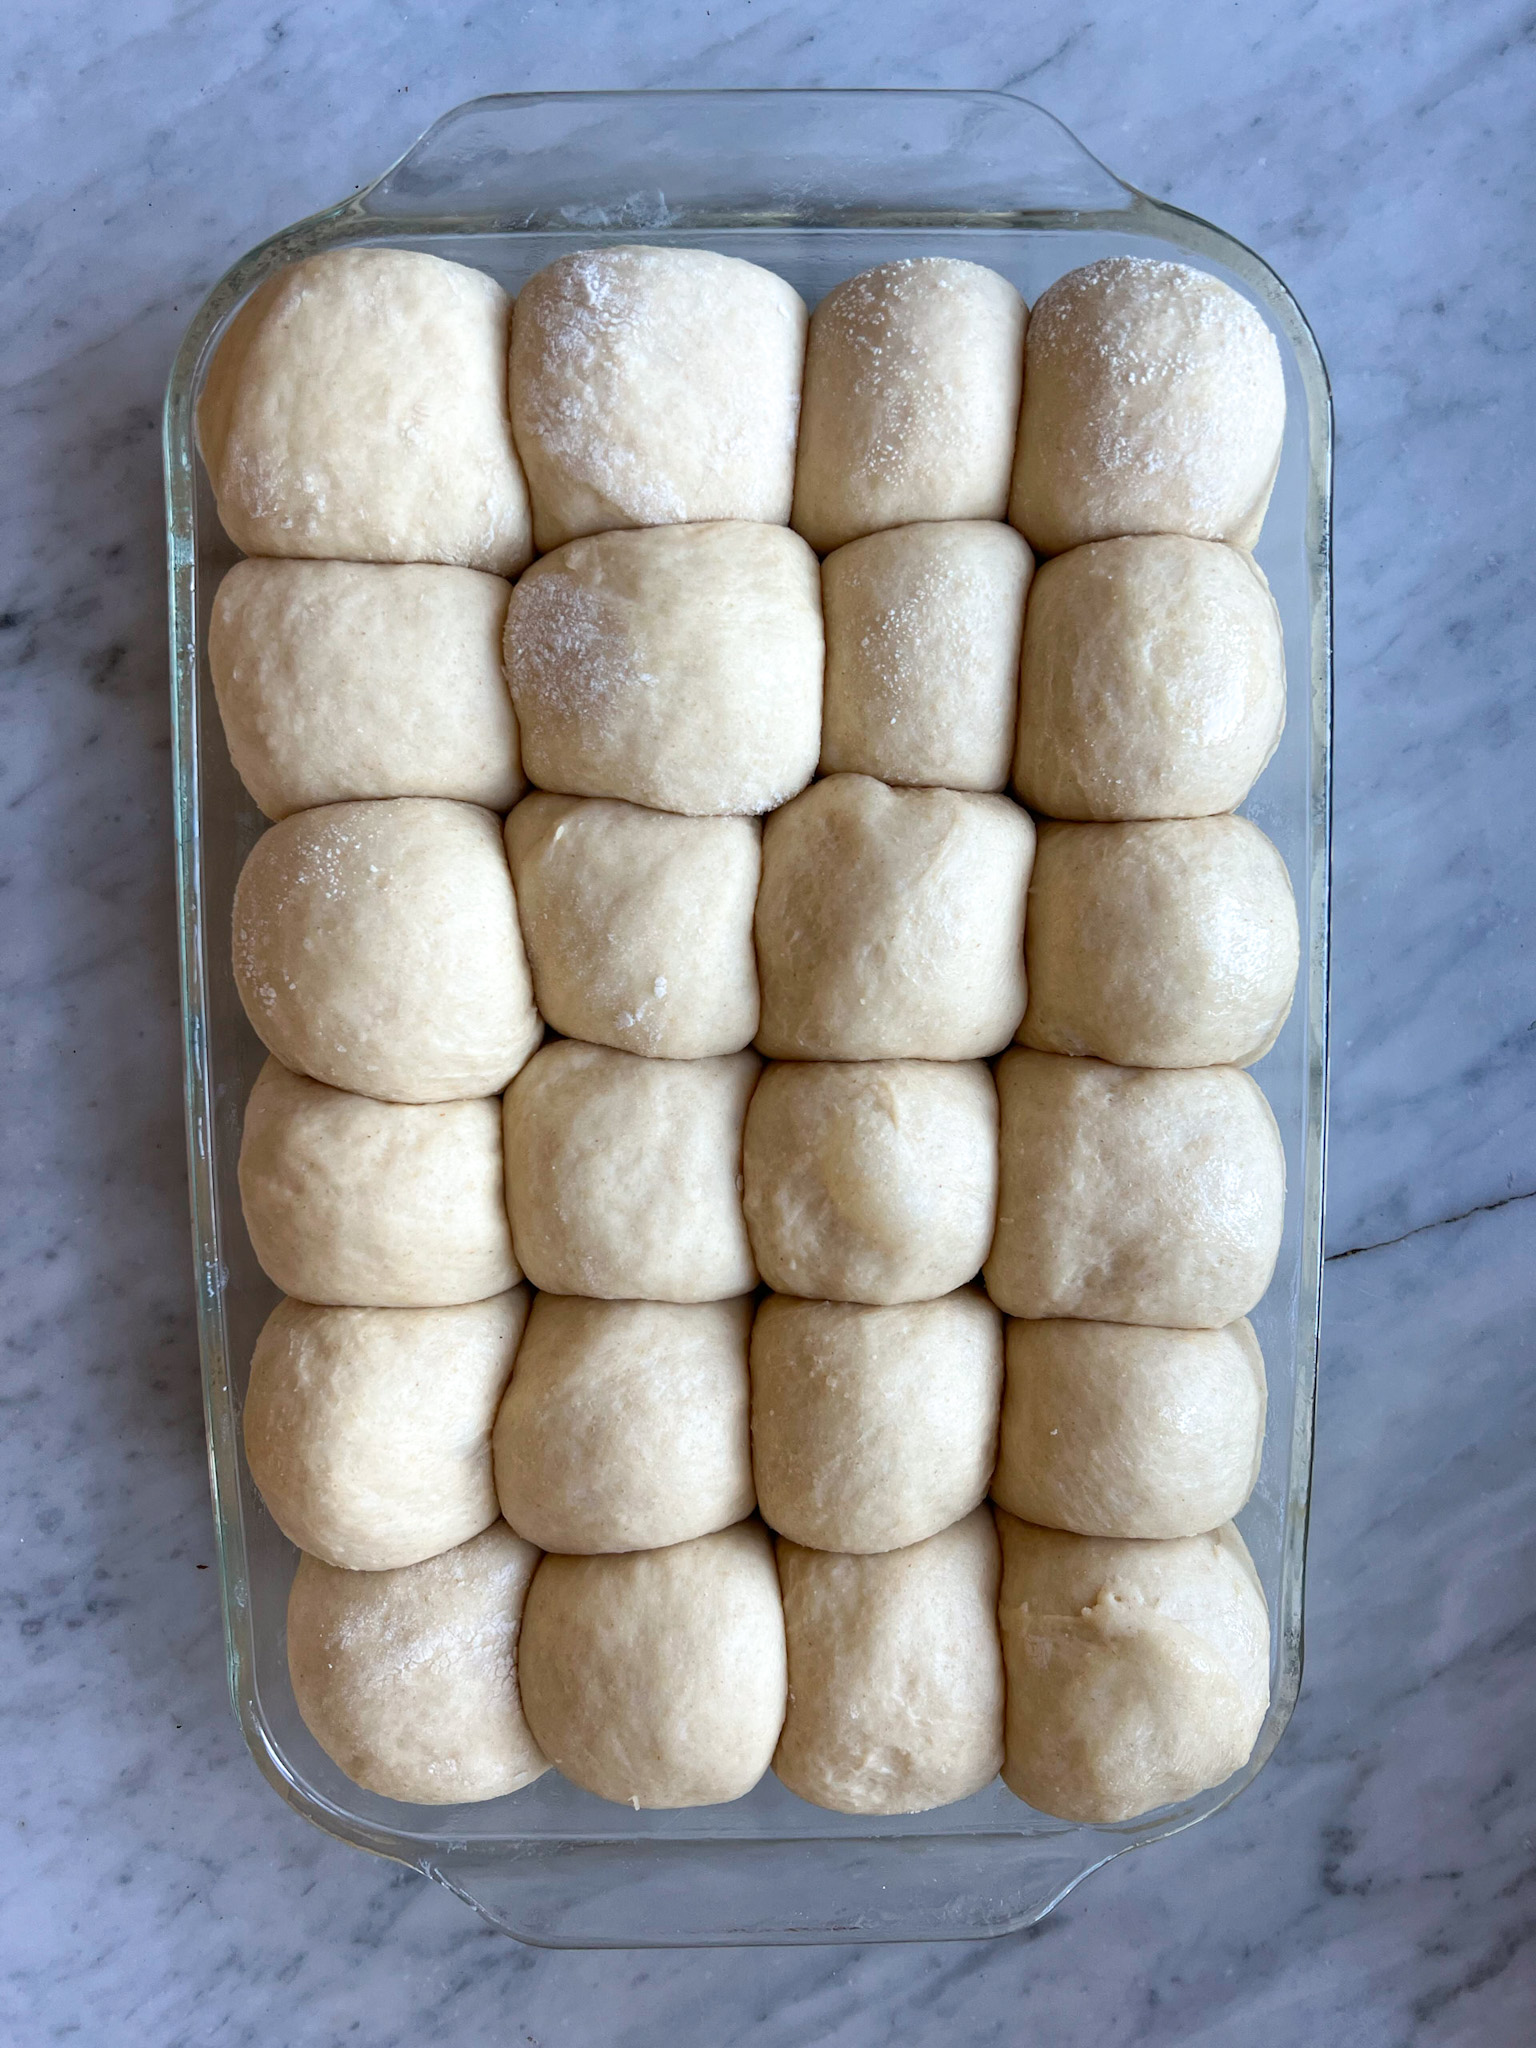 yeast bread rolls that have proved and ready to bake